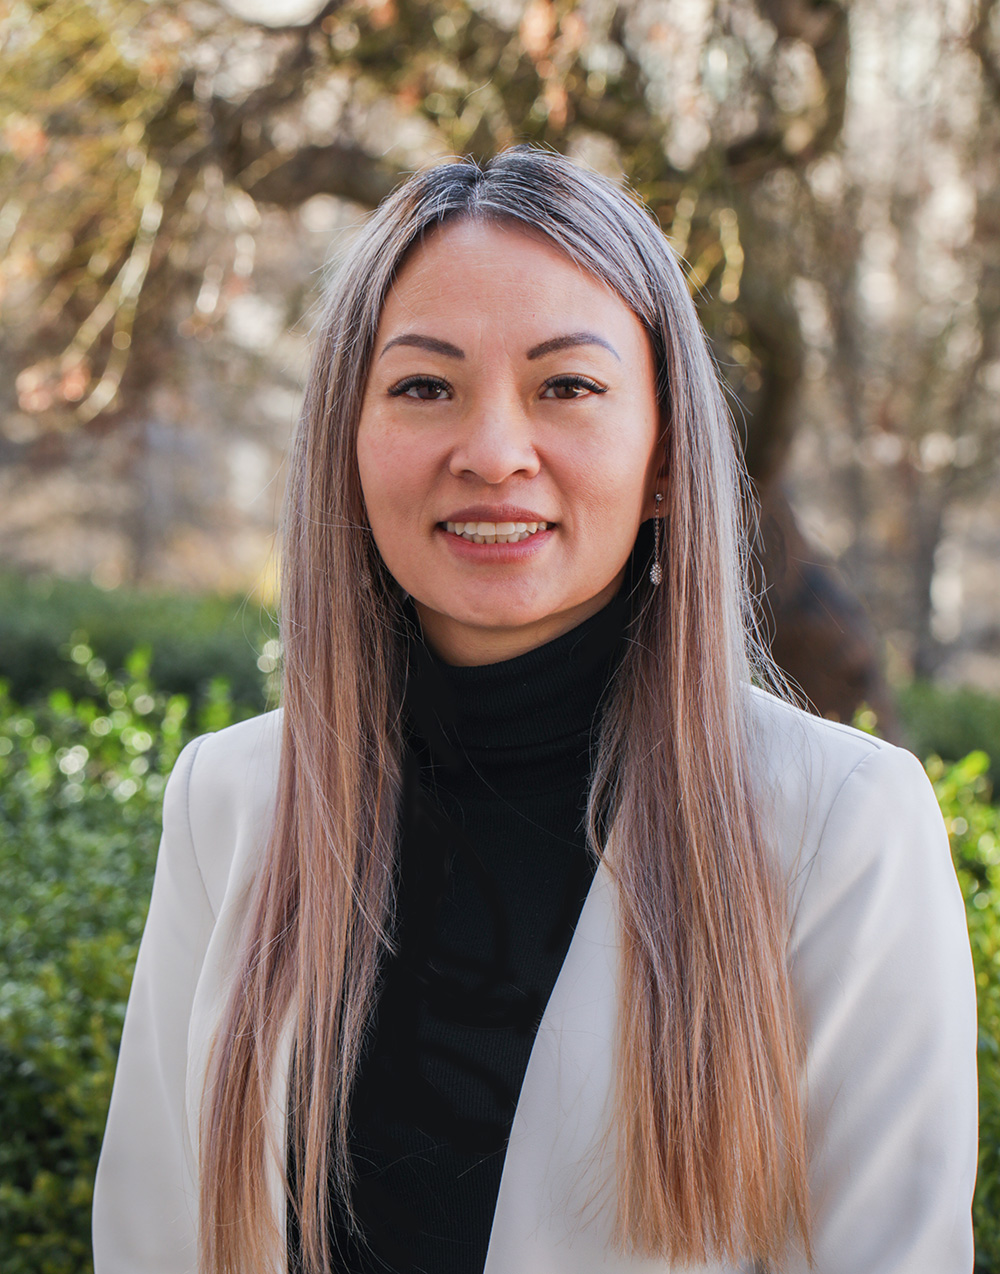 image of Jenifer Chao, a Southeast Asian woman with long brown/blonde hair. She is smiling and wearing a black turtleneck top under a grey blazer.